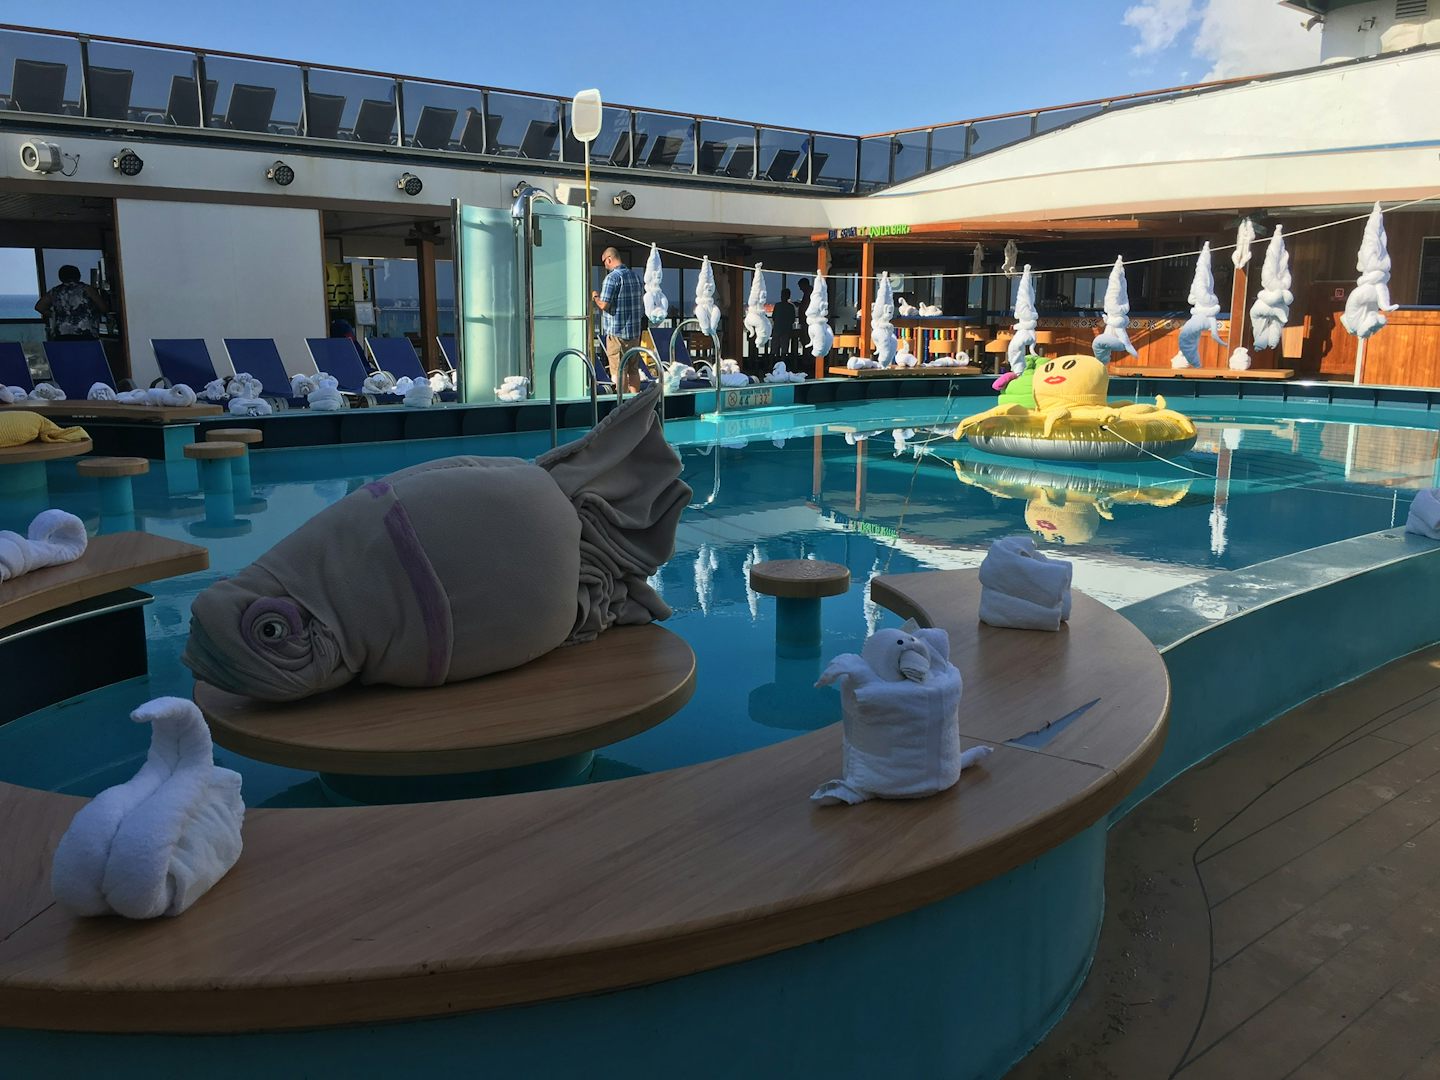 Towel animal day on the Lido Deck!!  Very cute!!